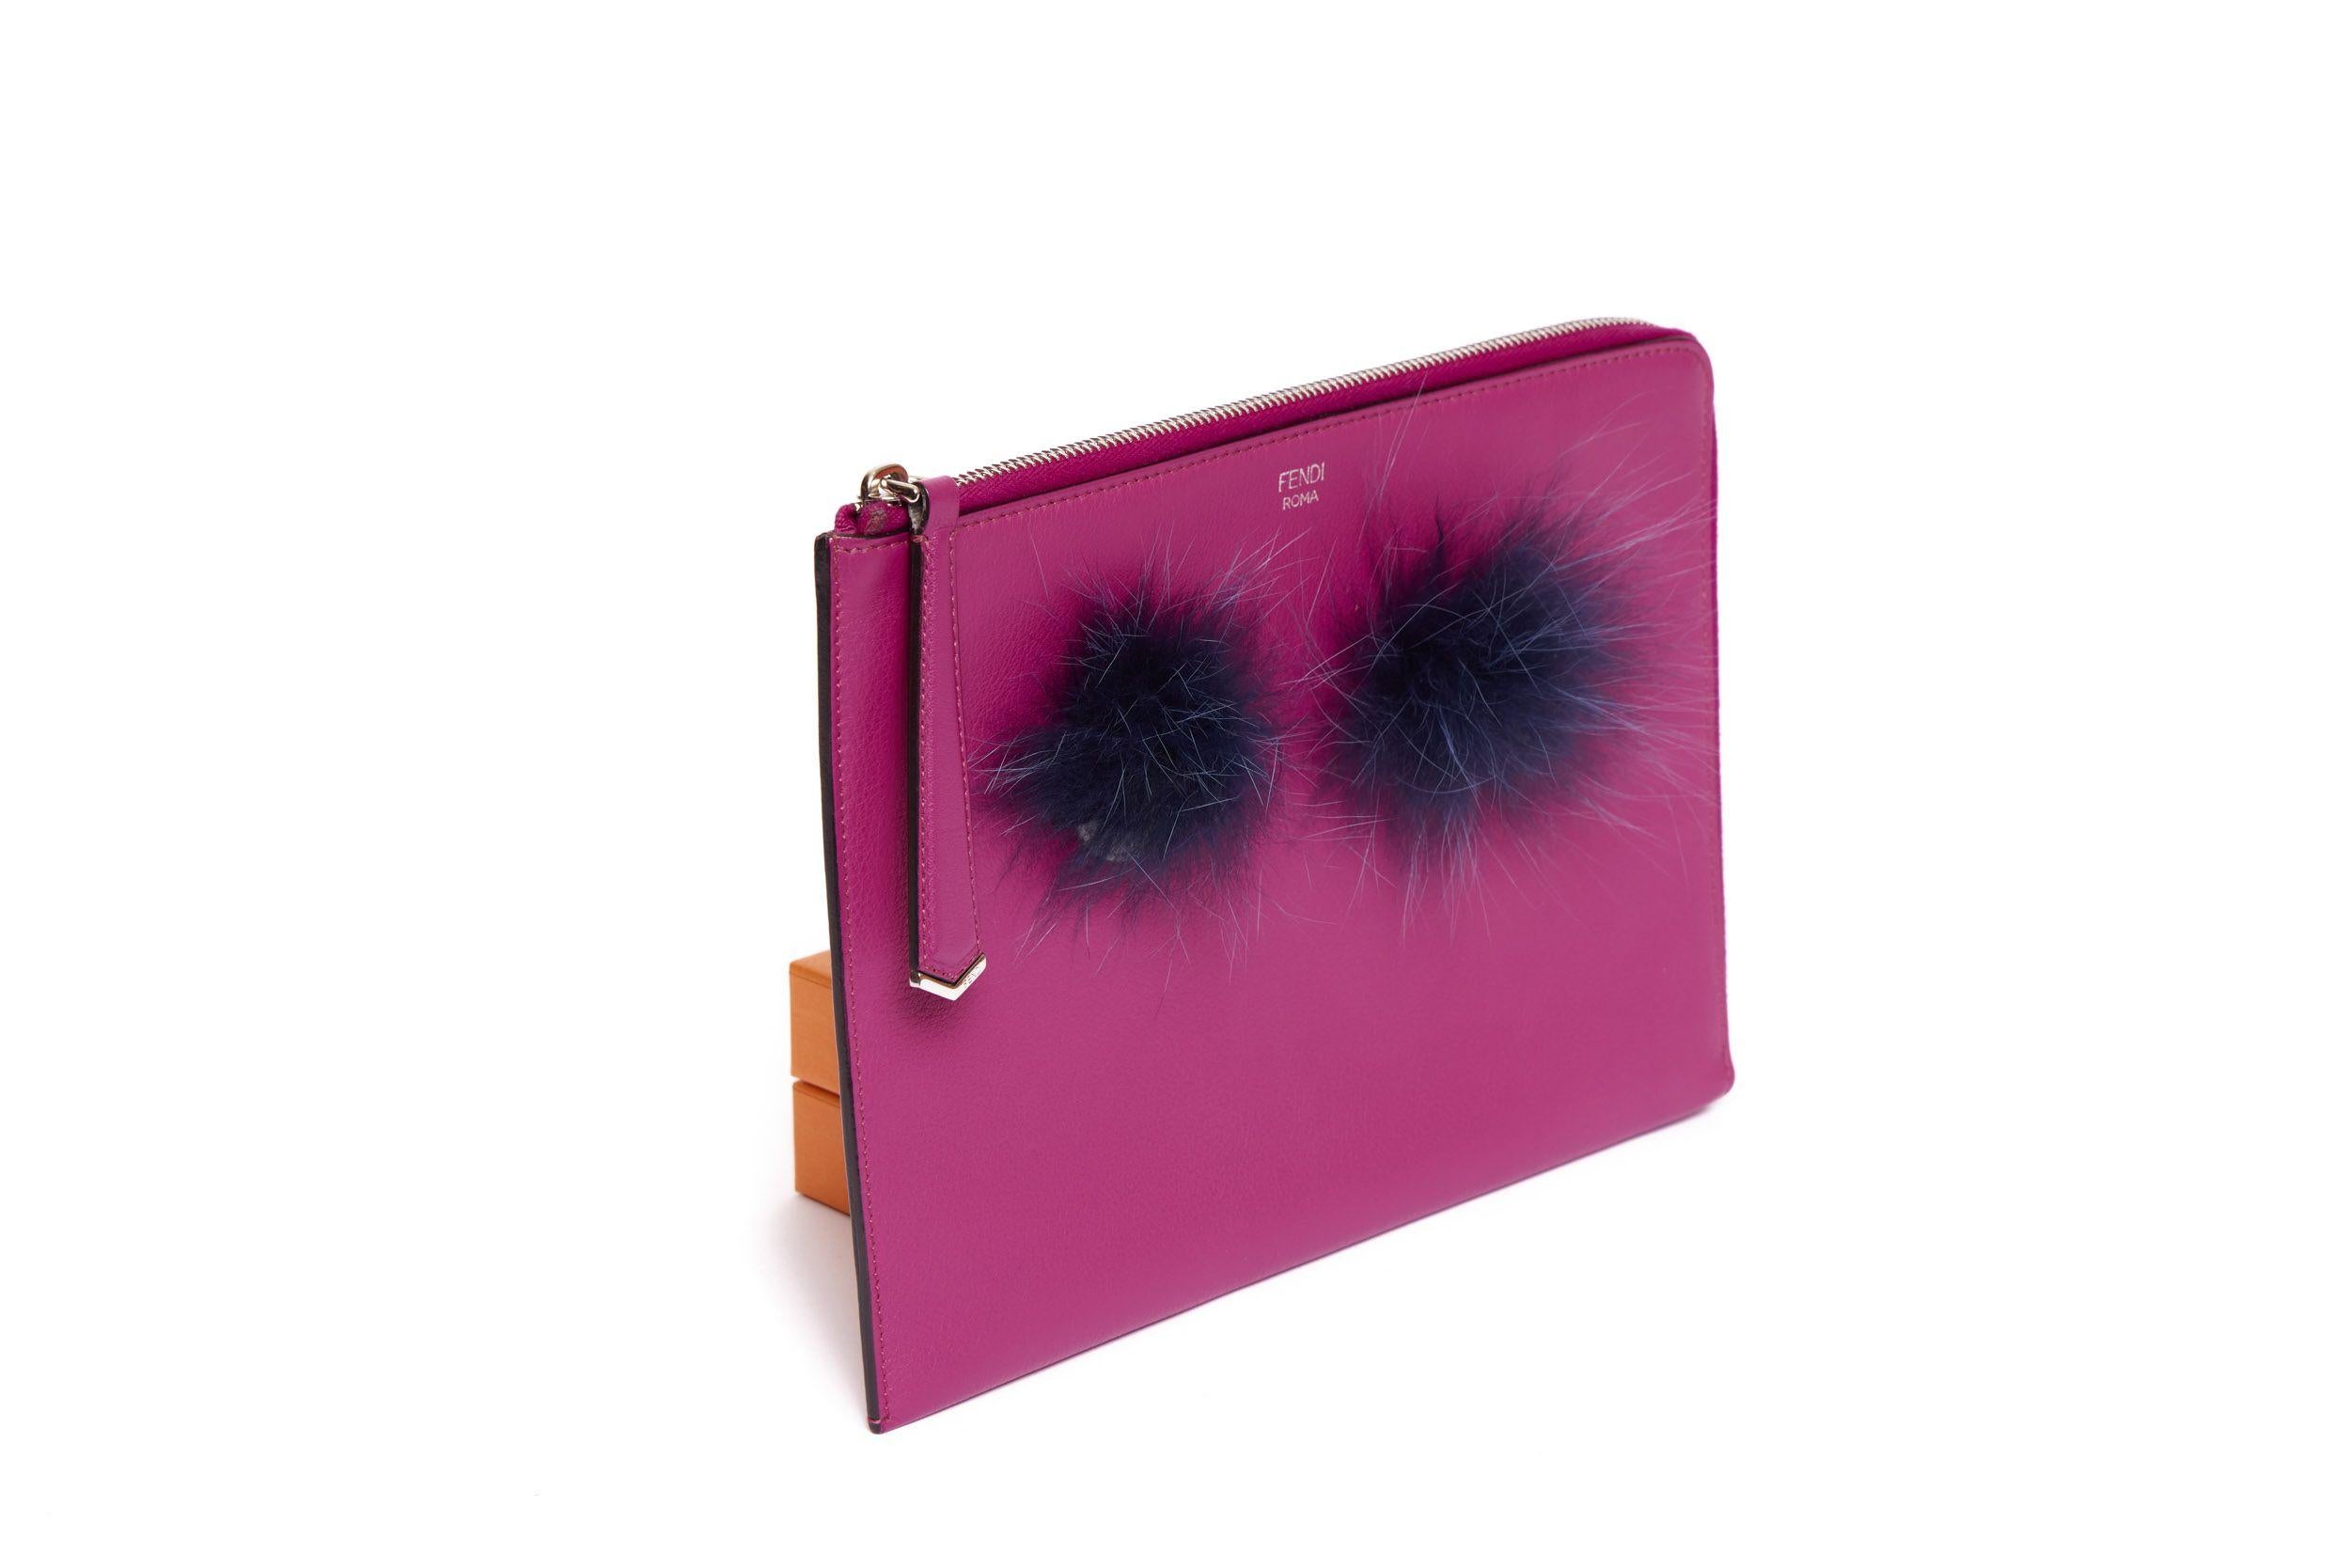 FENDI Fuchsia leather Clutch from the Monster Collection. On front of the clutch are two Monster Eyes motifs crafted of black faux fur. It has a single interior compartment lined with fuchsia canvas and comes with silver metal hardware. The piece